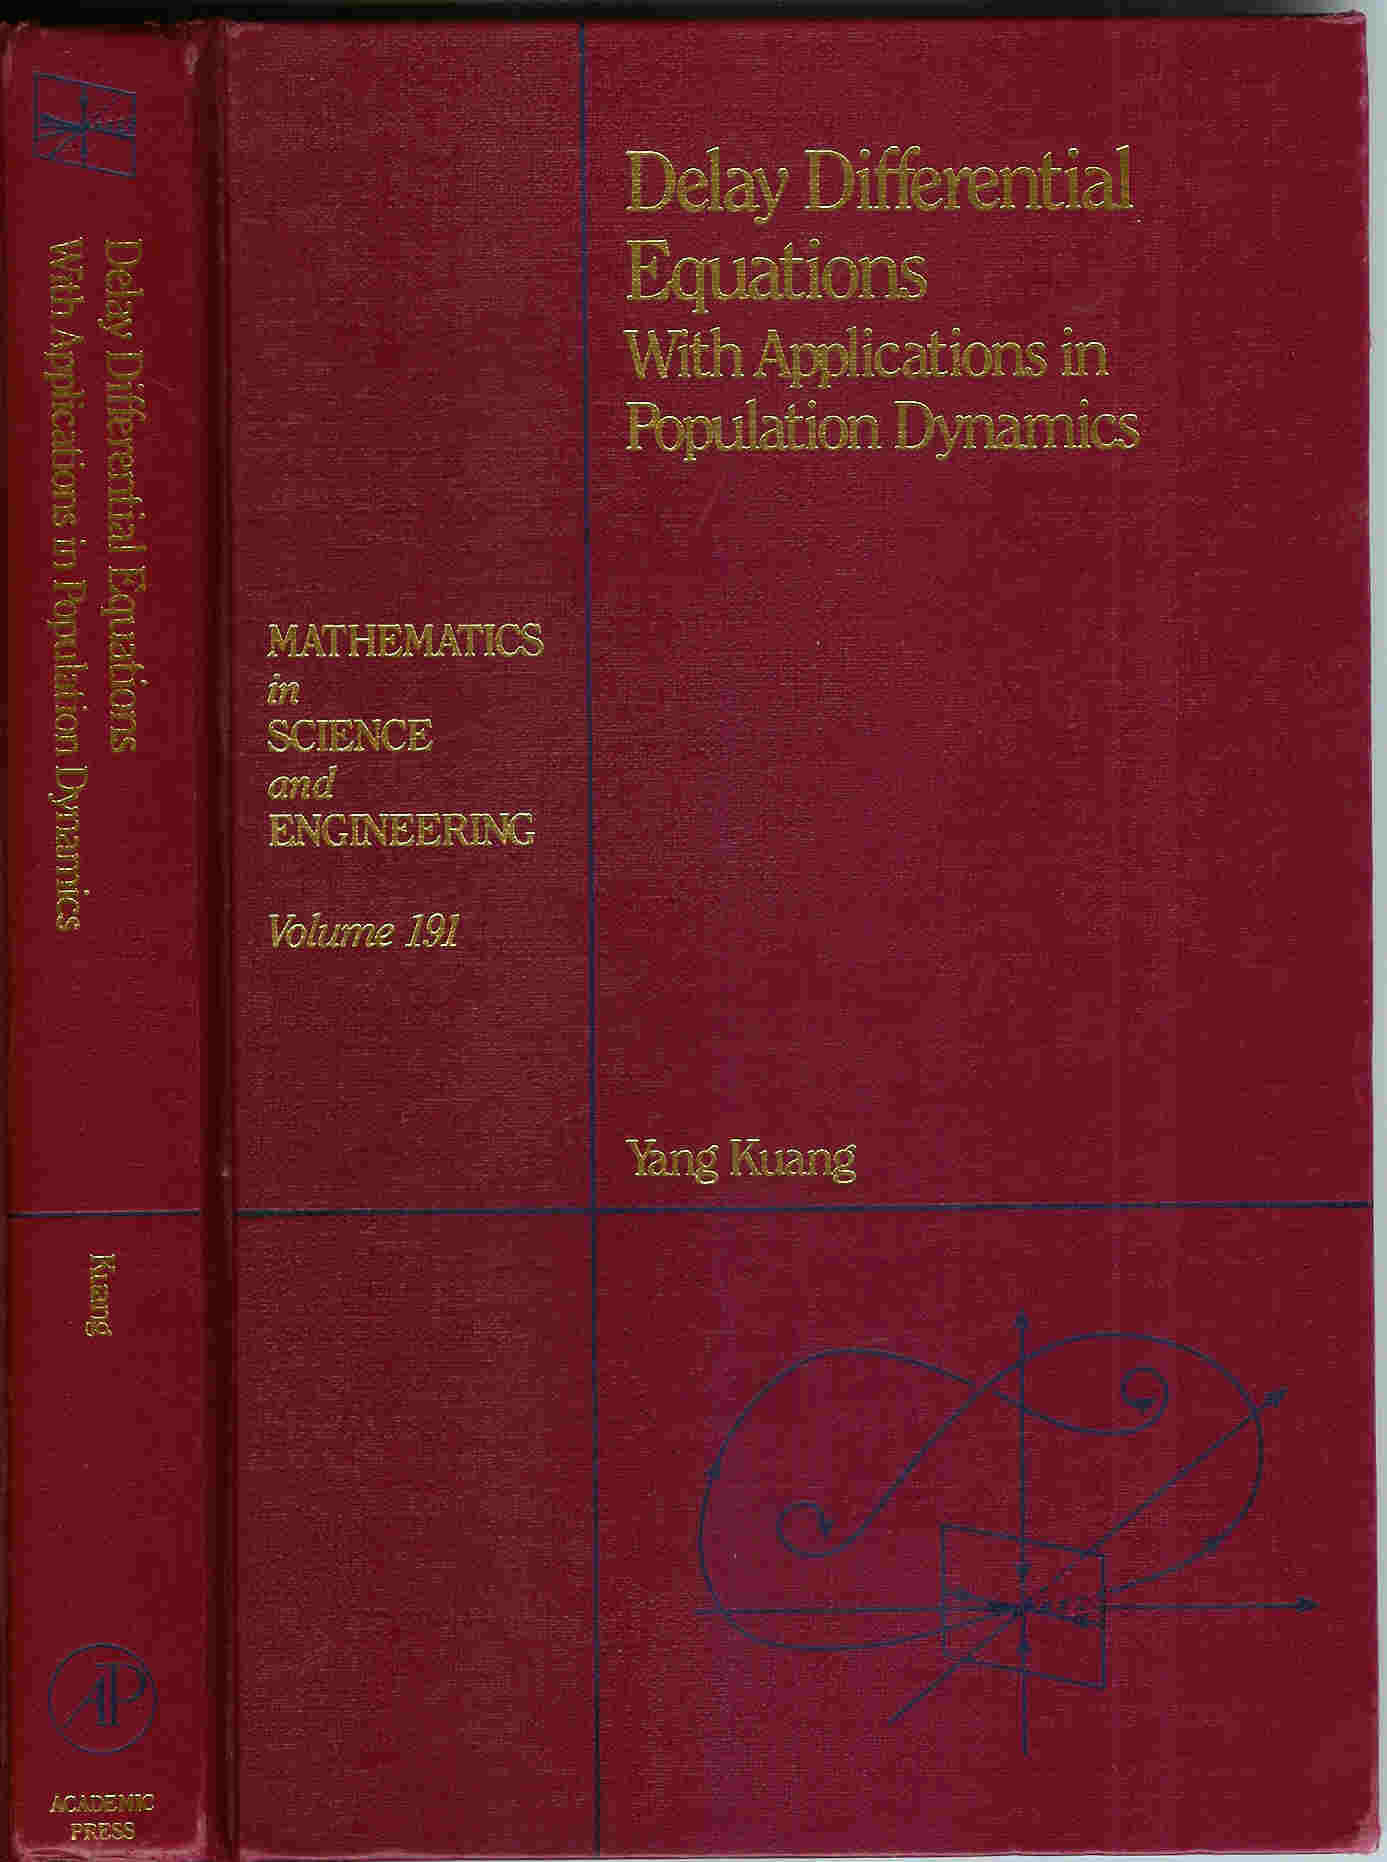 delay differential equations with applications in population dynamics